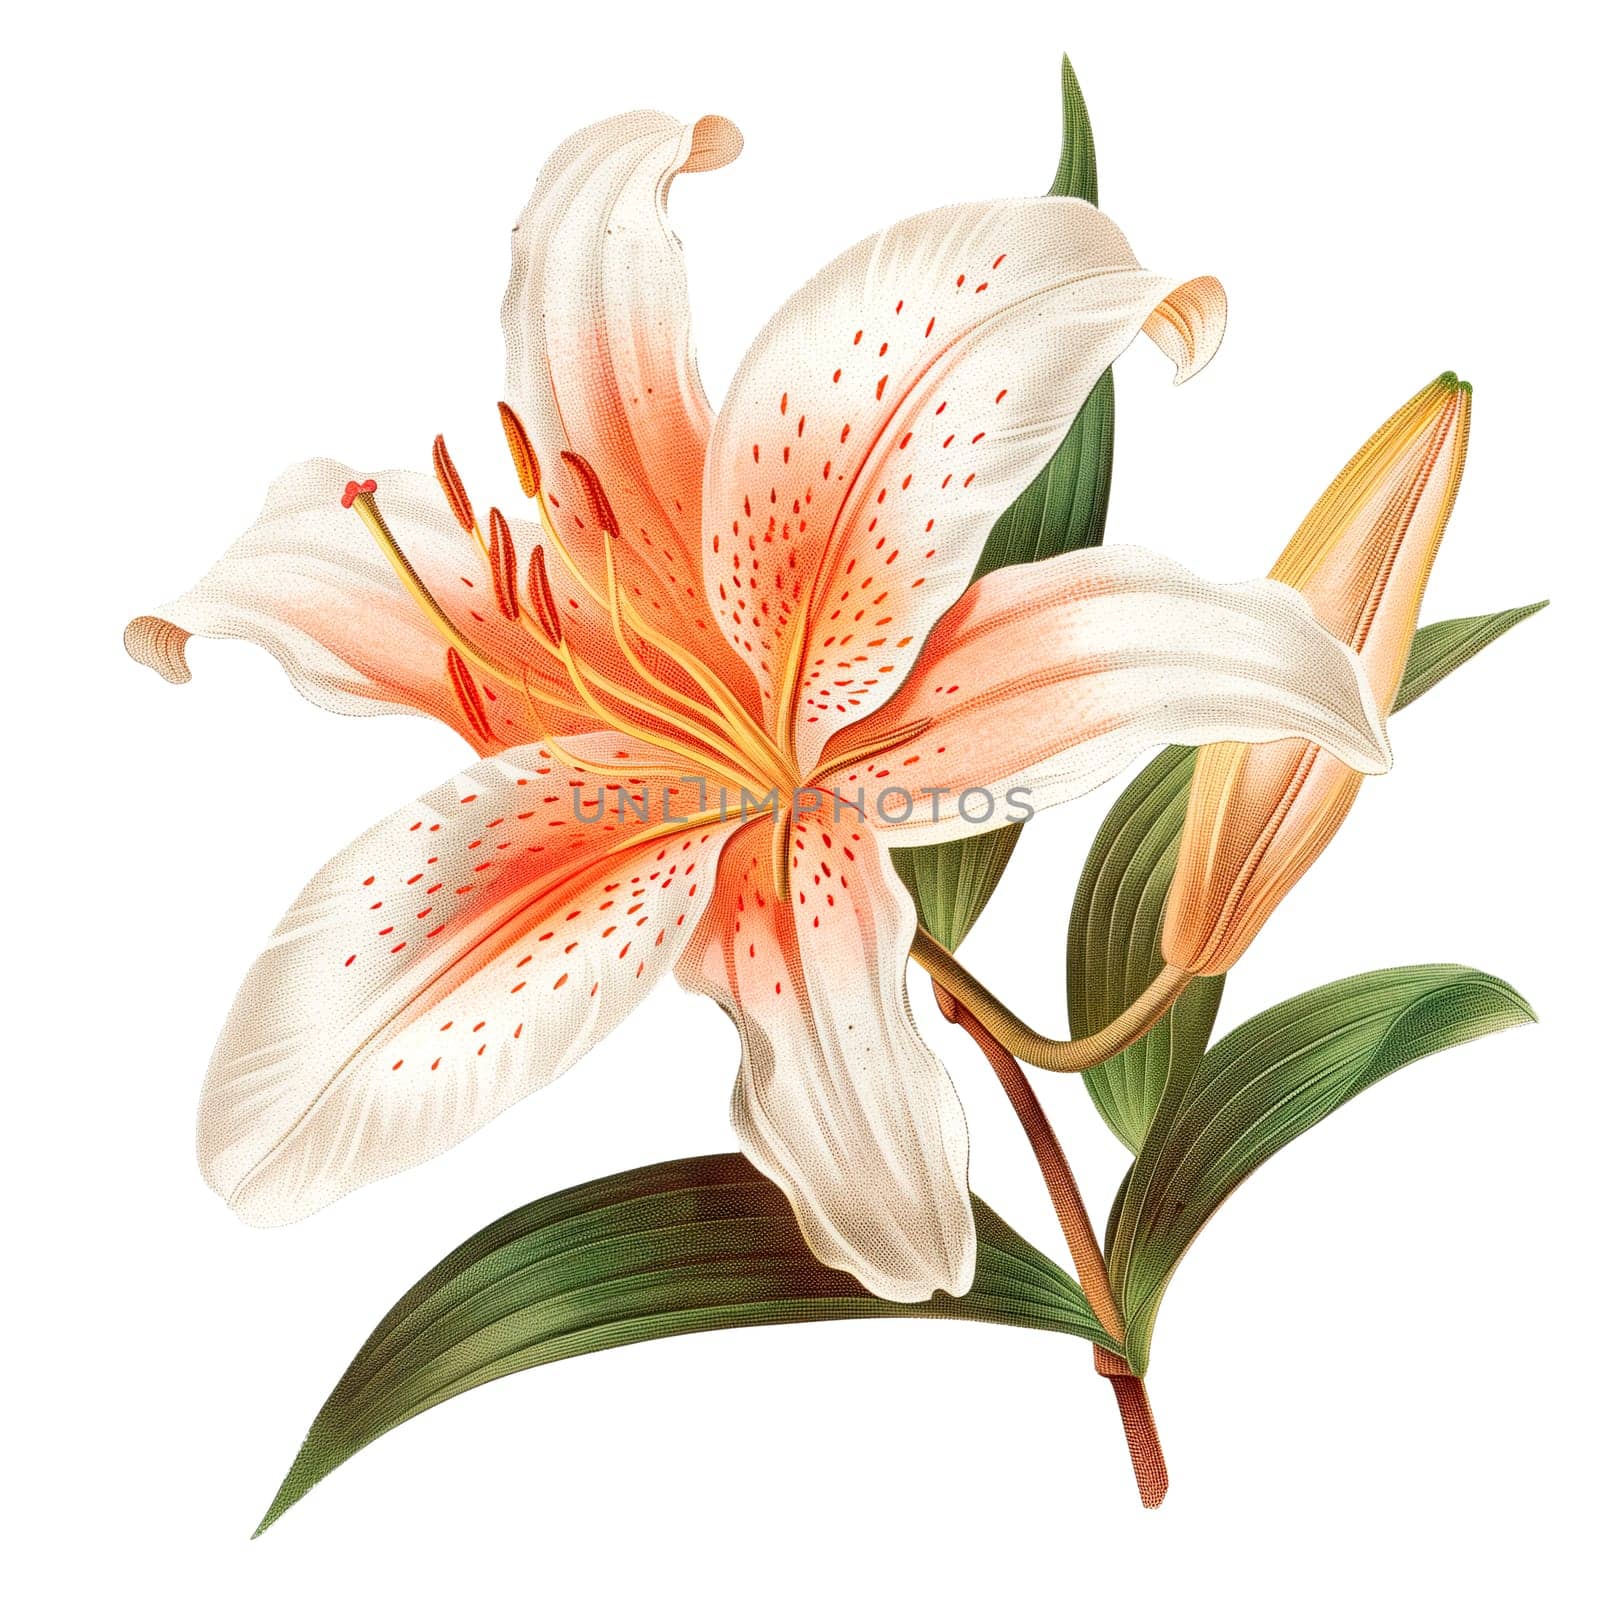 Isolated illustration of Lily flower by Dustick